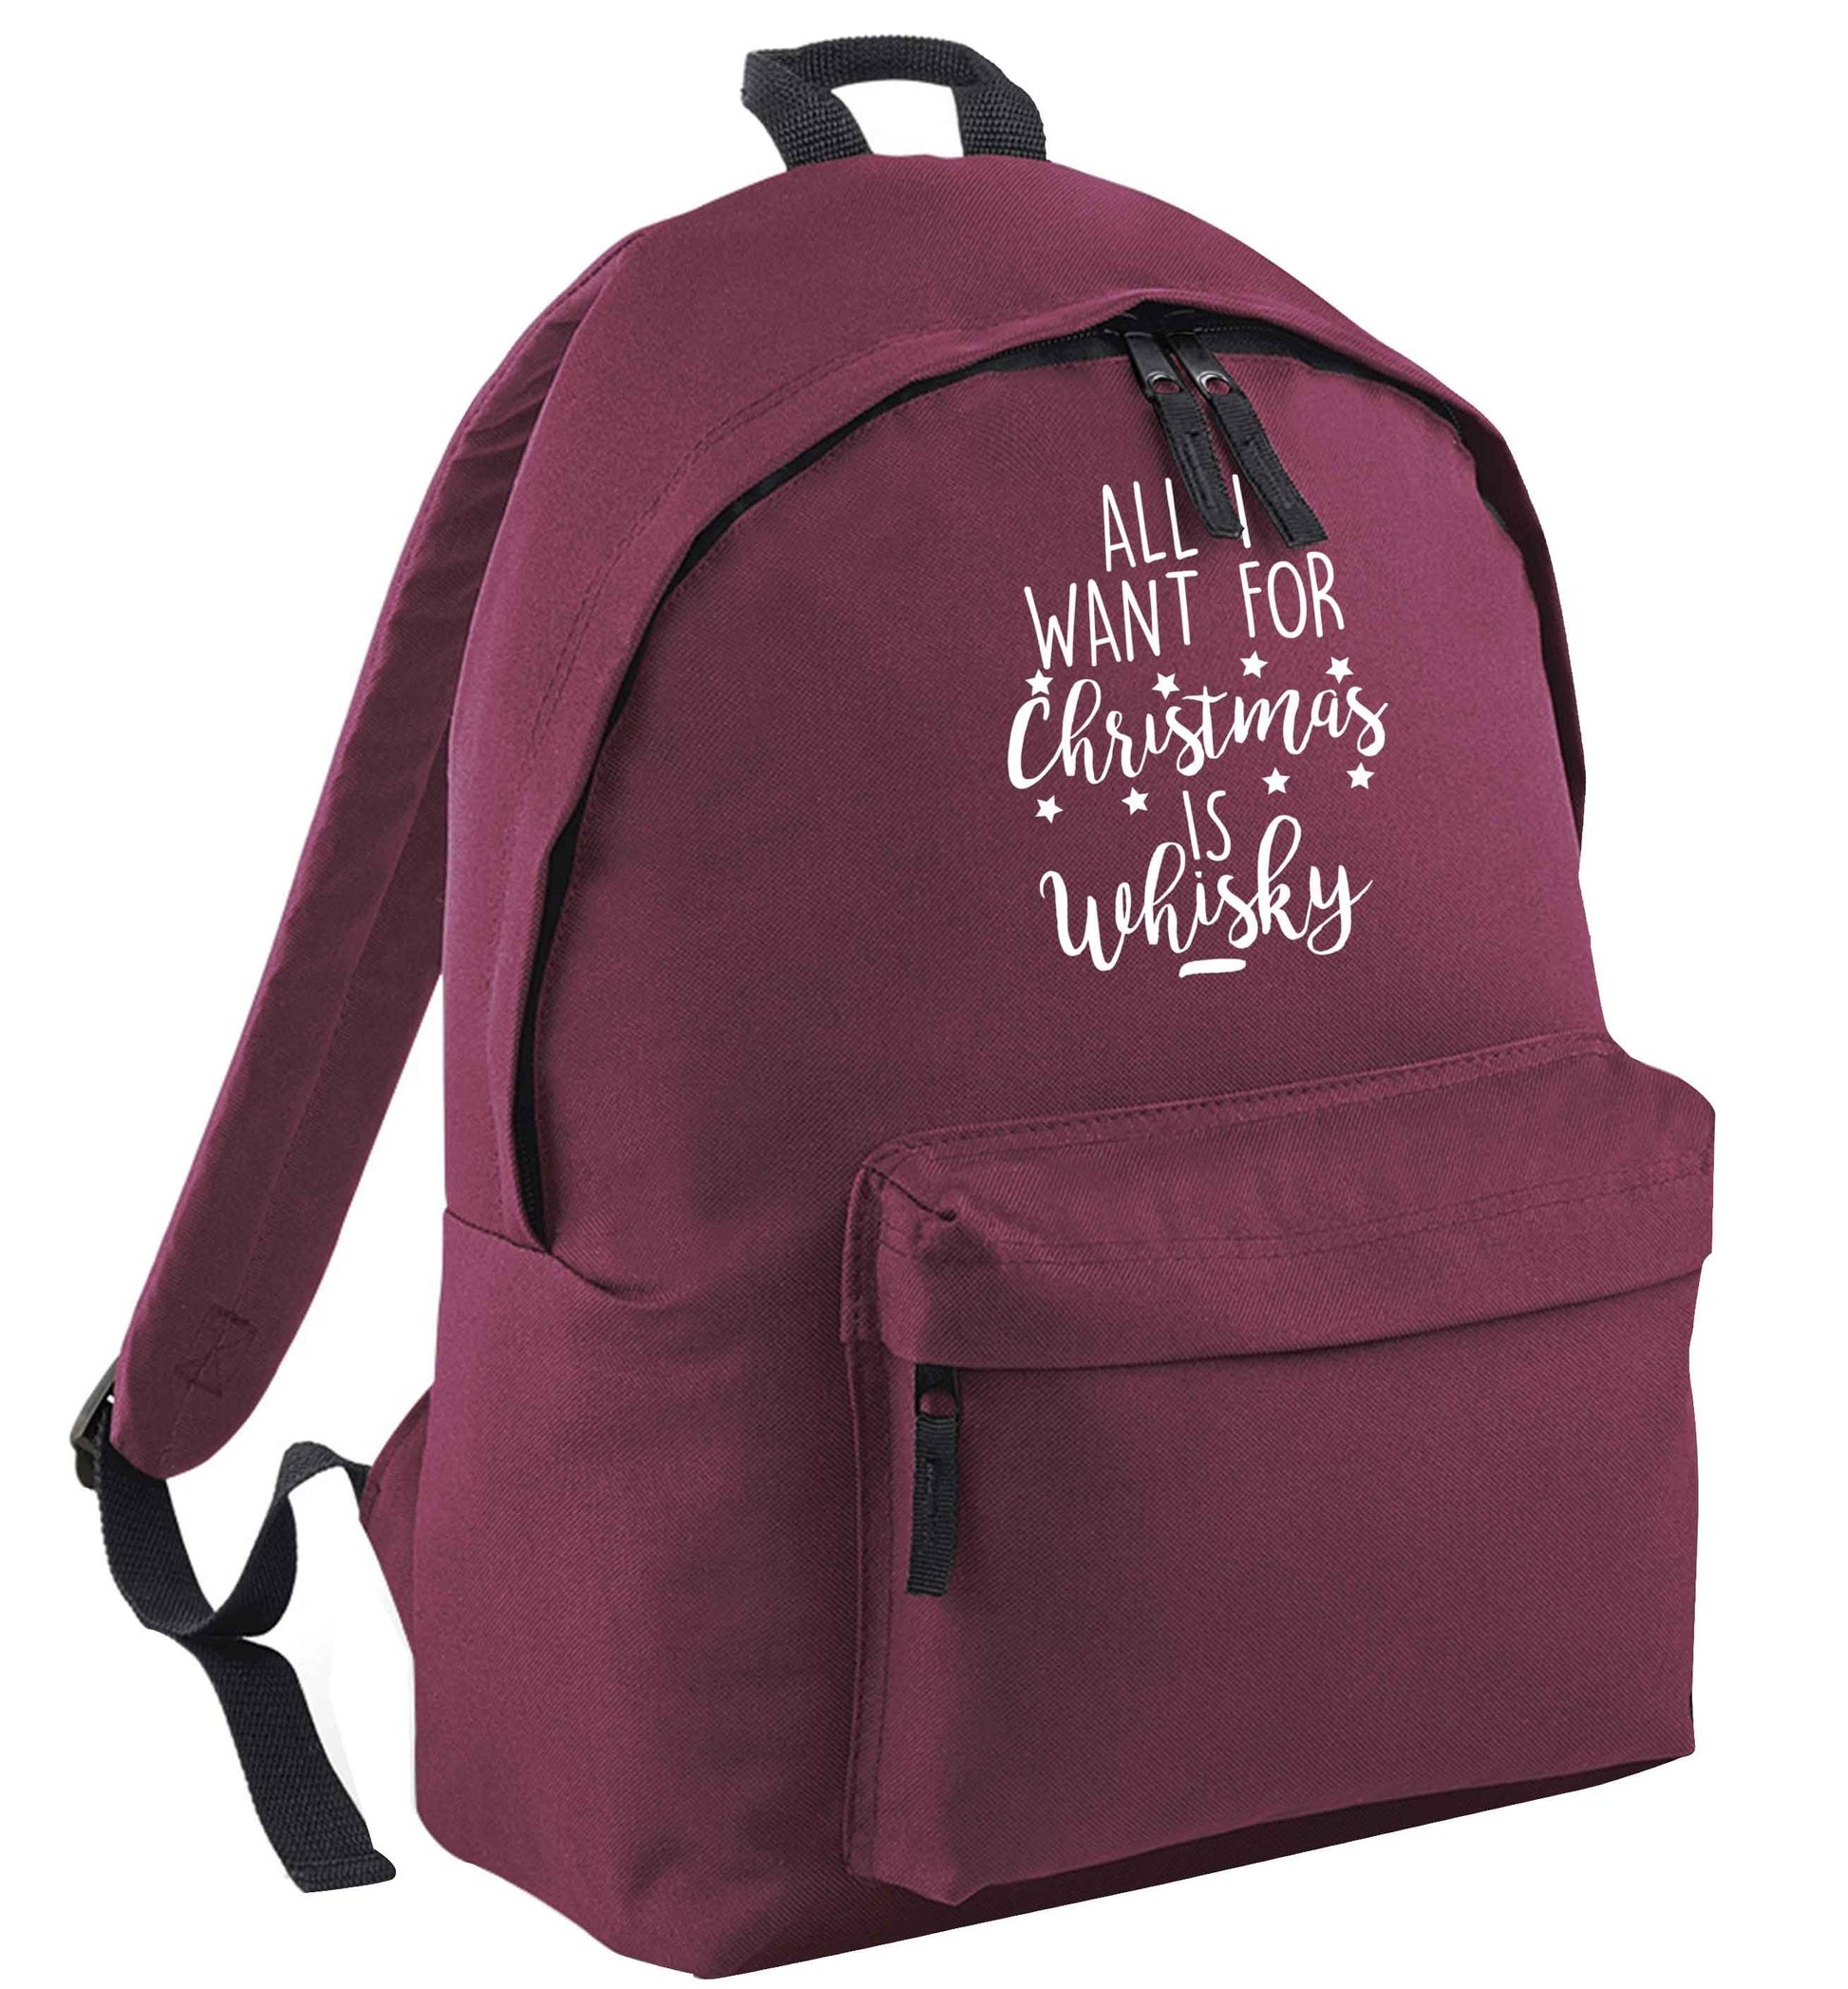 All I want for Christmas is whisky maroon adults backpack